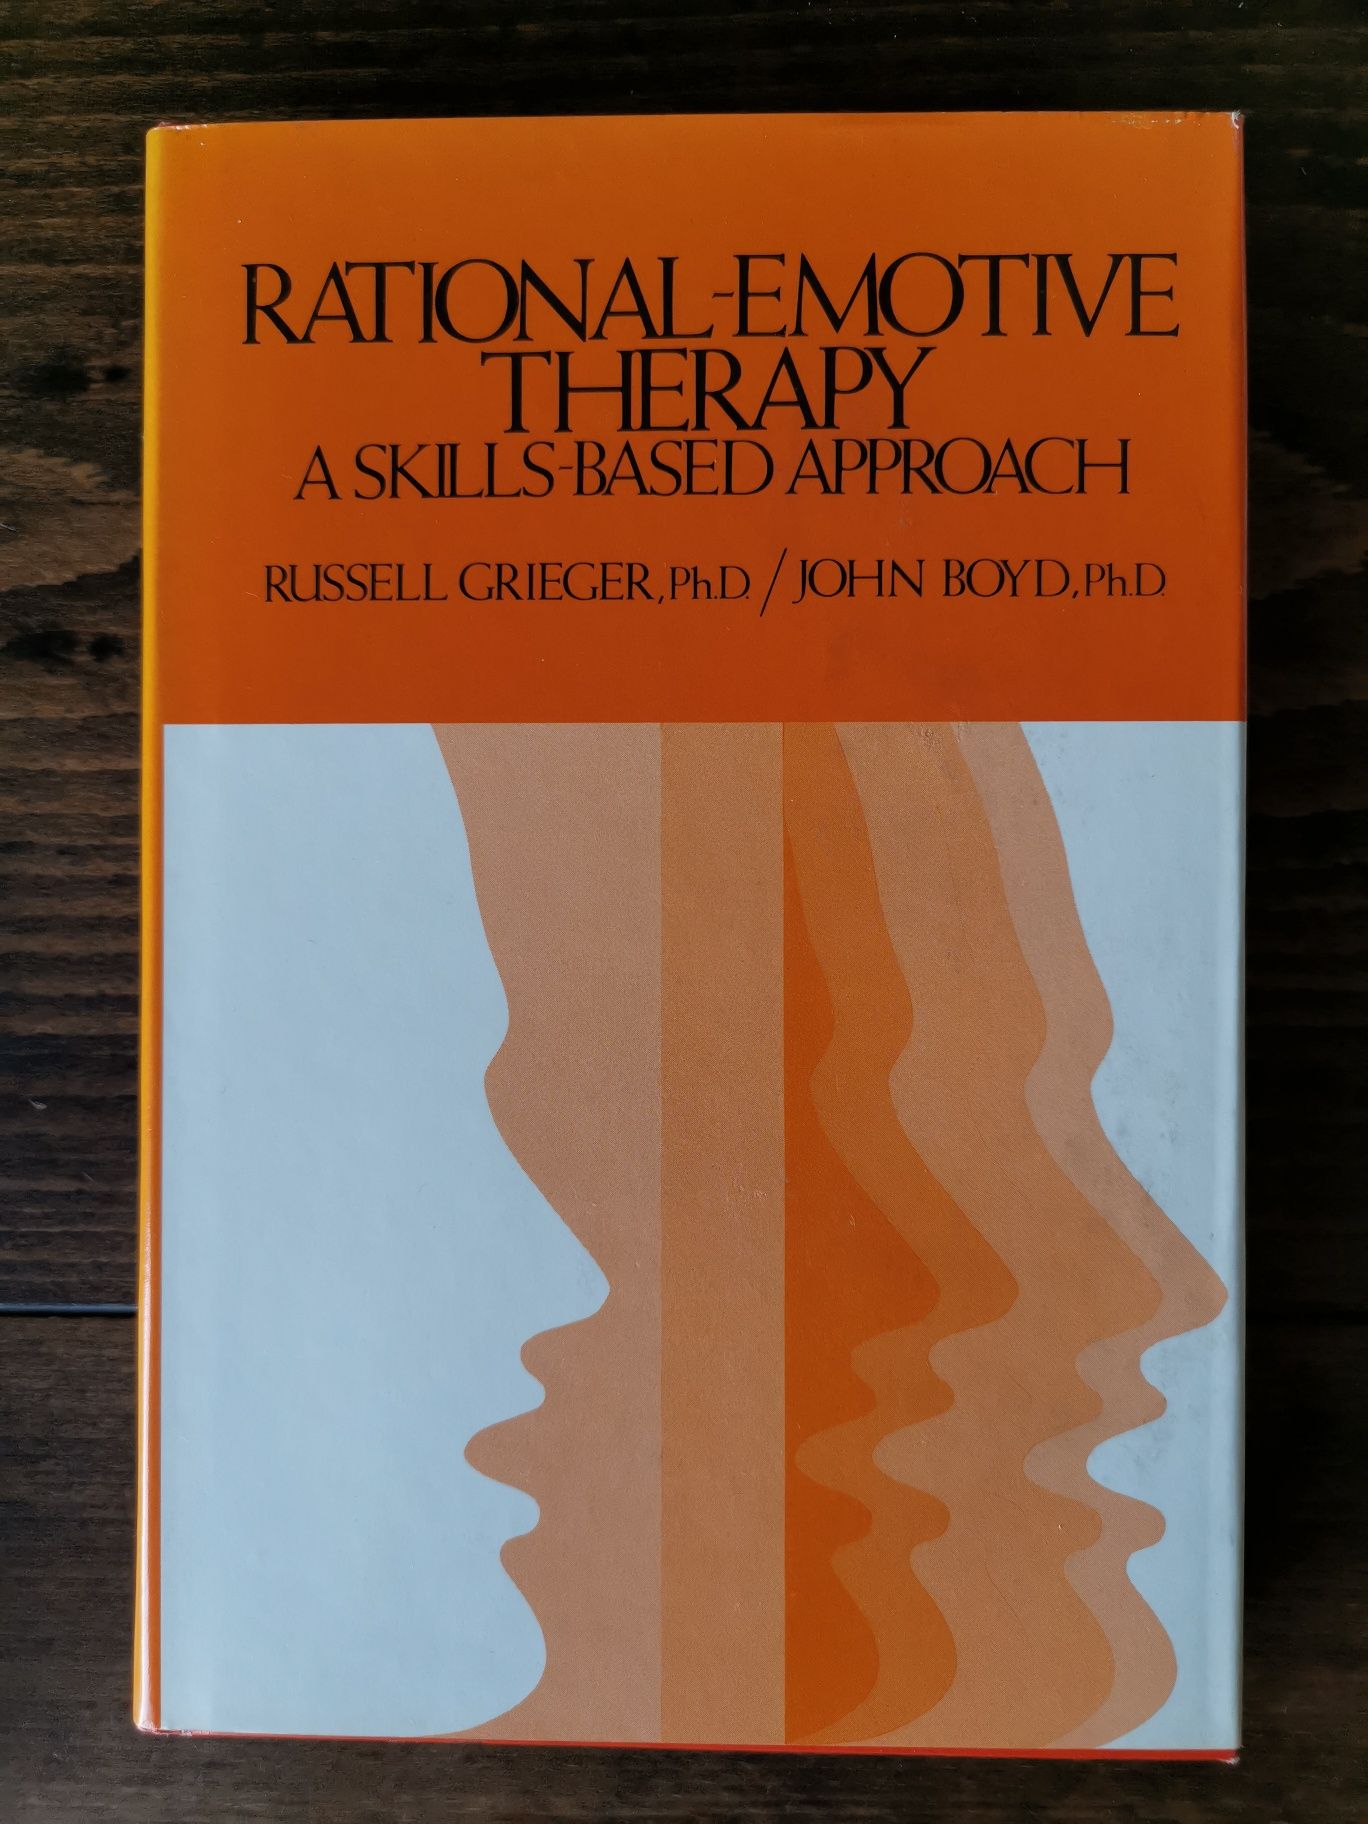 Rational-emotive theraphy, Grieger, Boyd